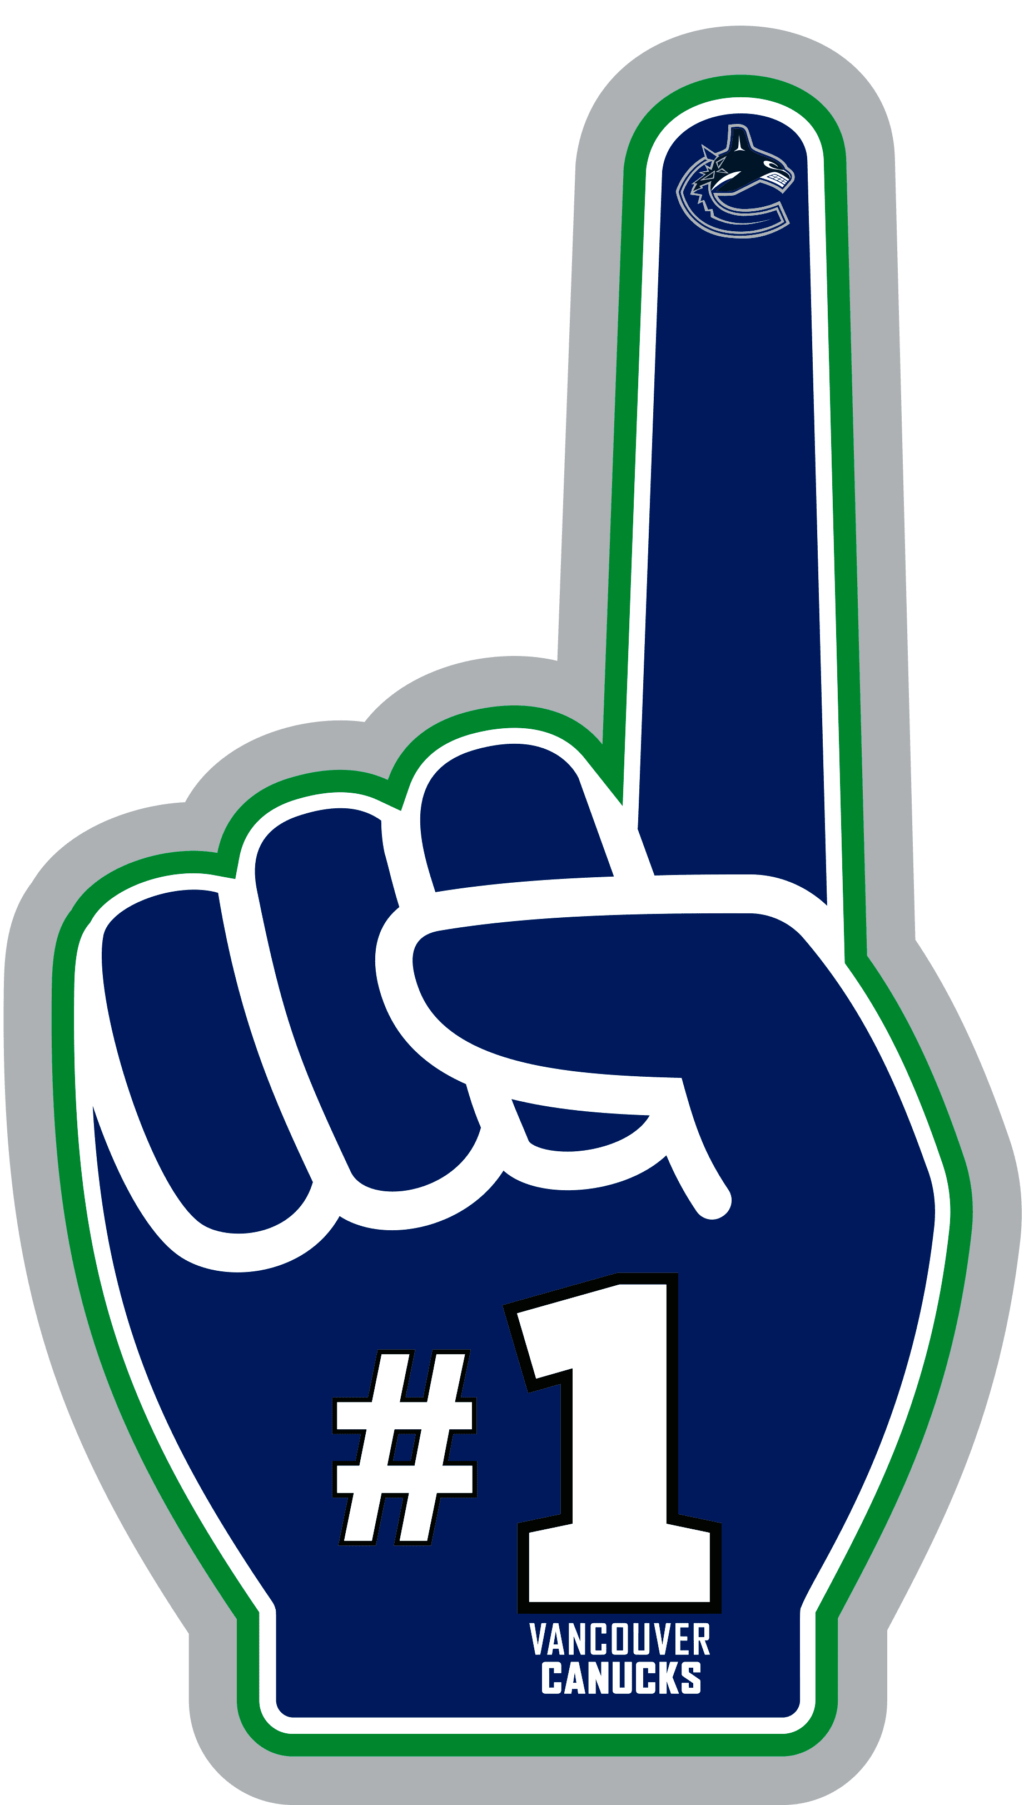 vancouver canucks 08 12 Styles NHL Vancouver Canucks Svg, Vancouver Canucks Svg, Vancouver Canucks Vector Logo, Vancouver Canucks hockey Clipart, Vancouver Canucks png, Vancouver Canucks cricut files.